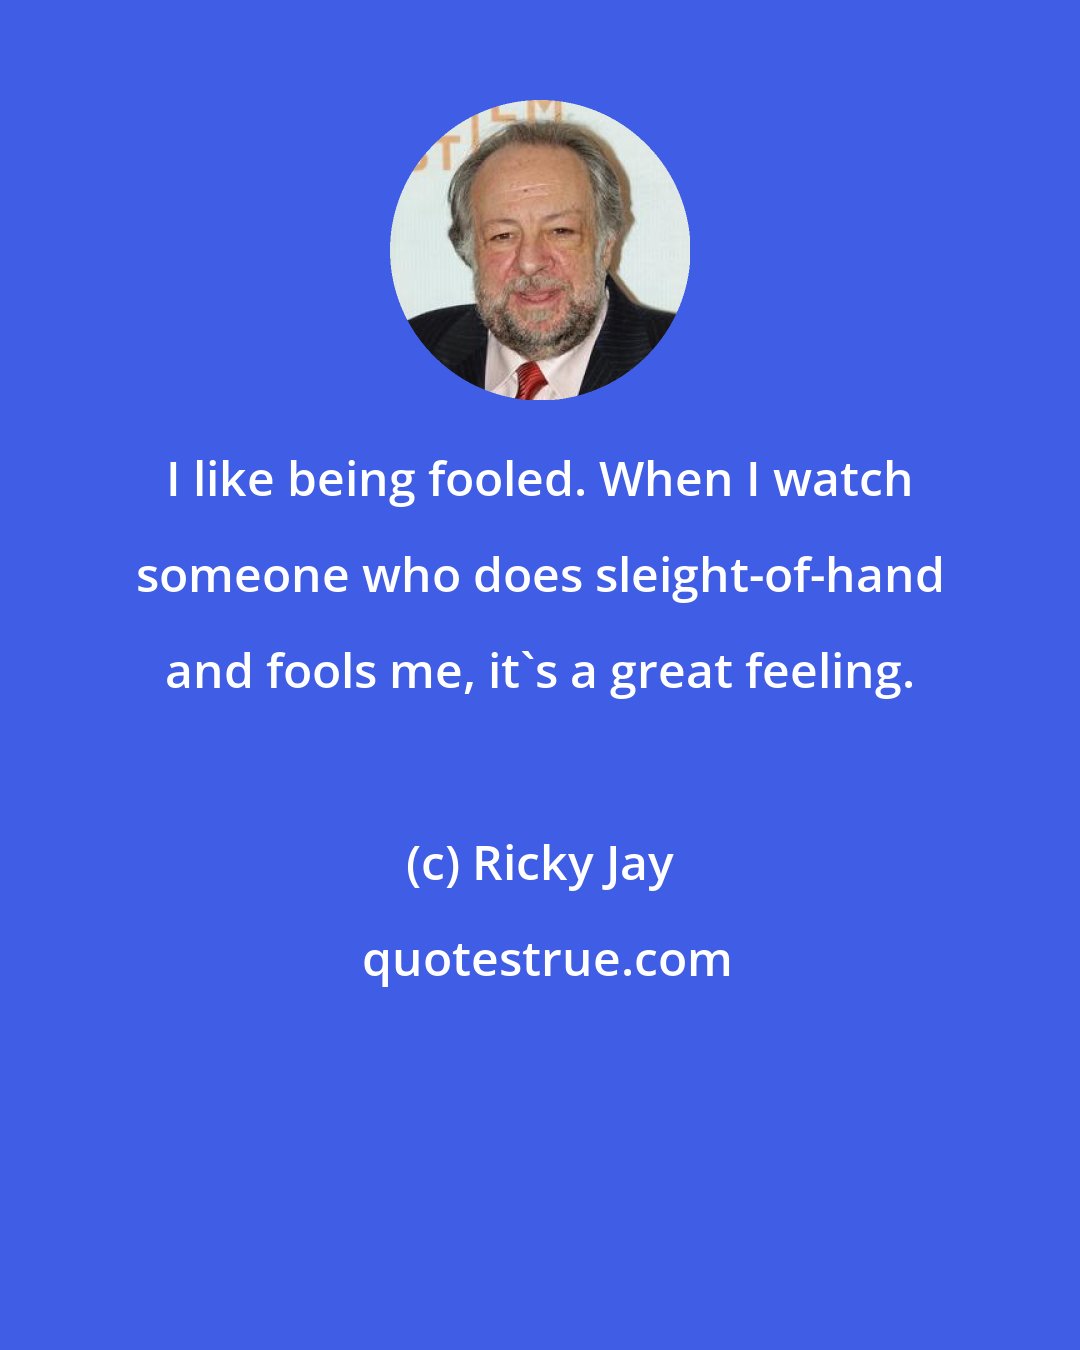 Ricky Jay: I like being fooled. When I watch someone who does sleight-of-hand and fools me, it's a great feeling.